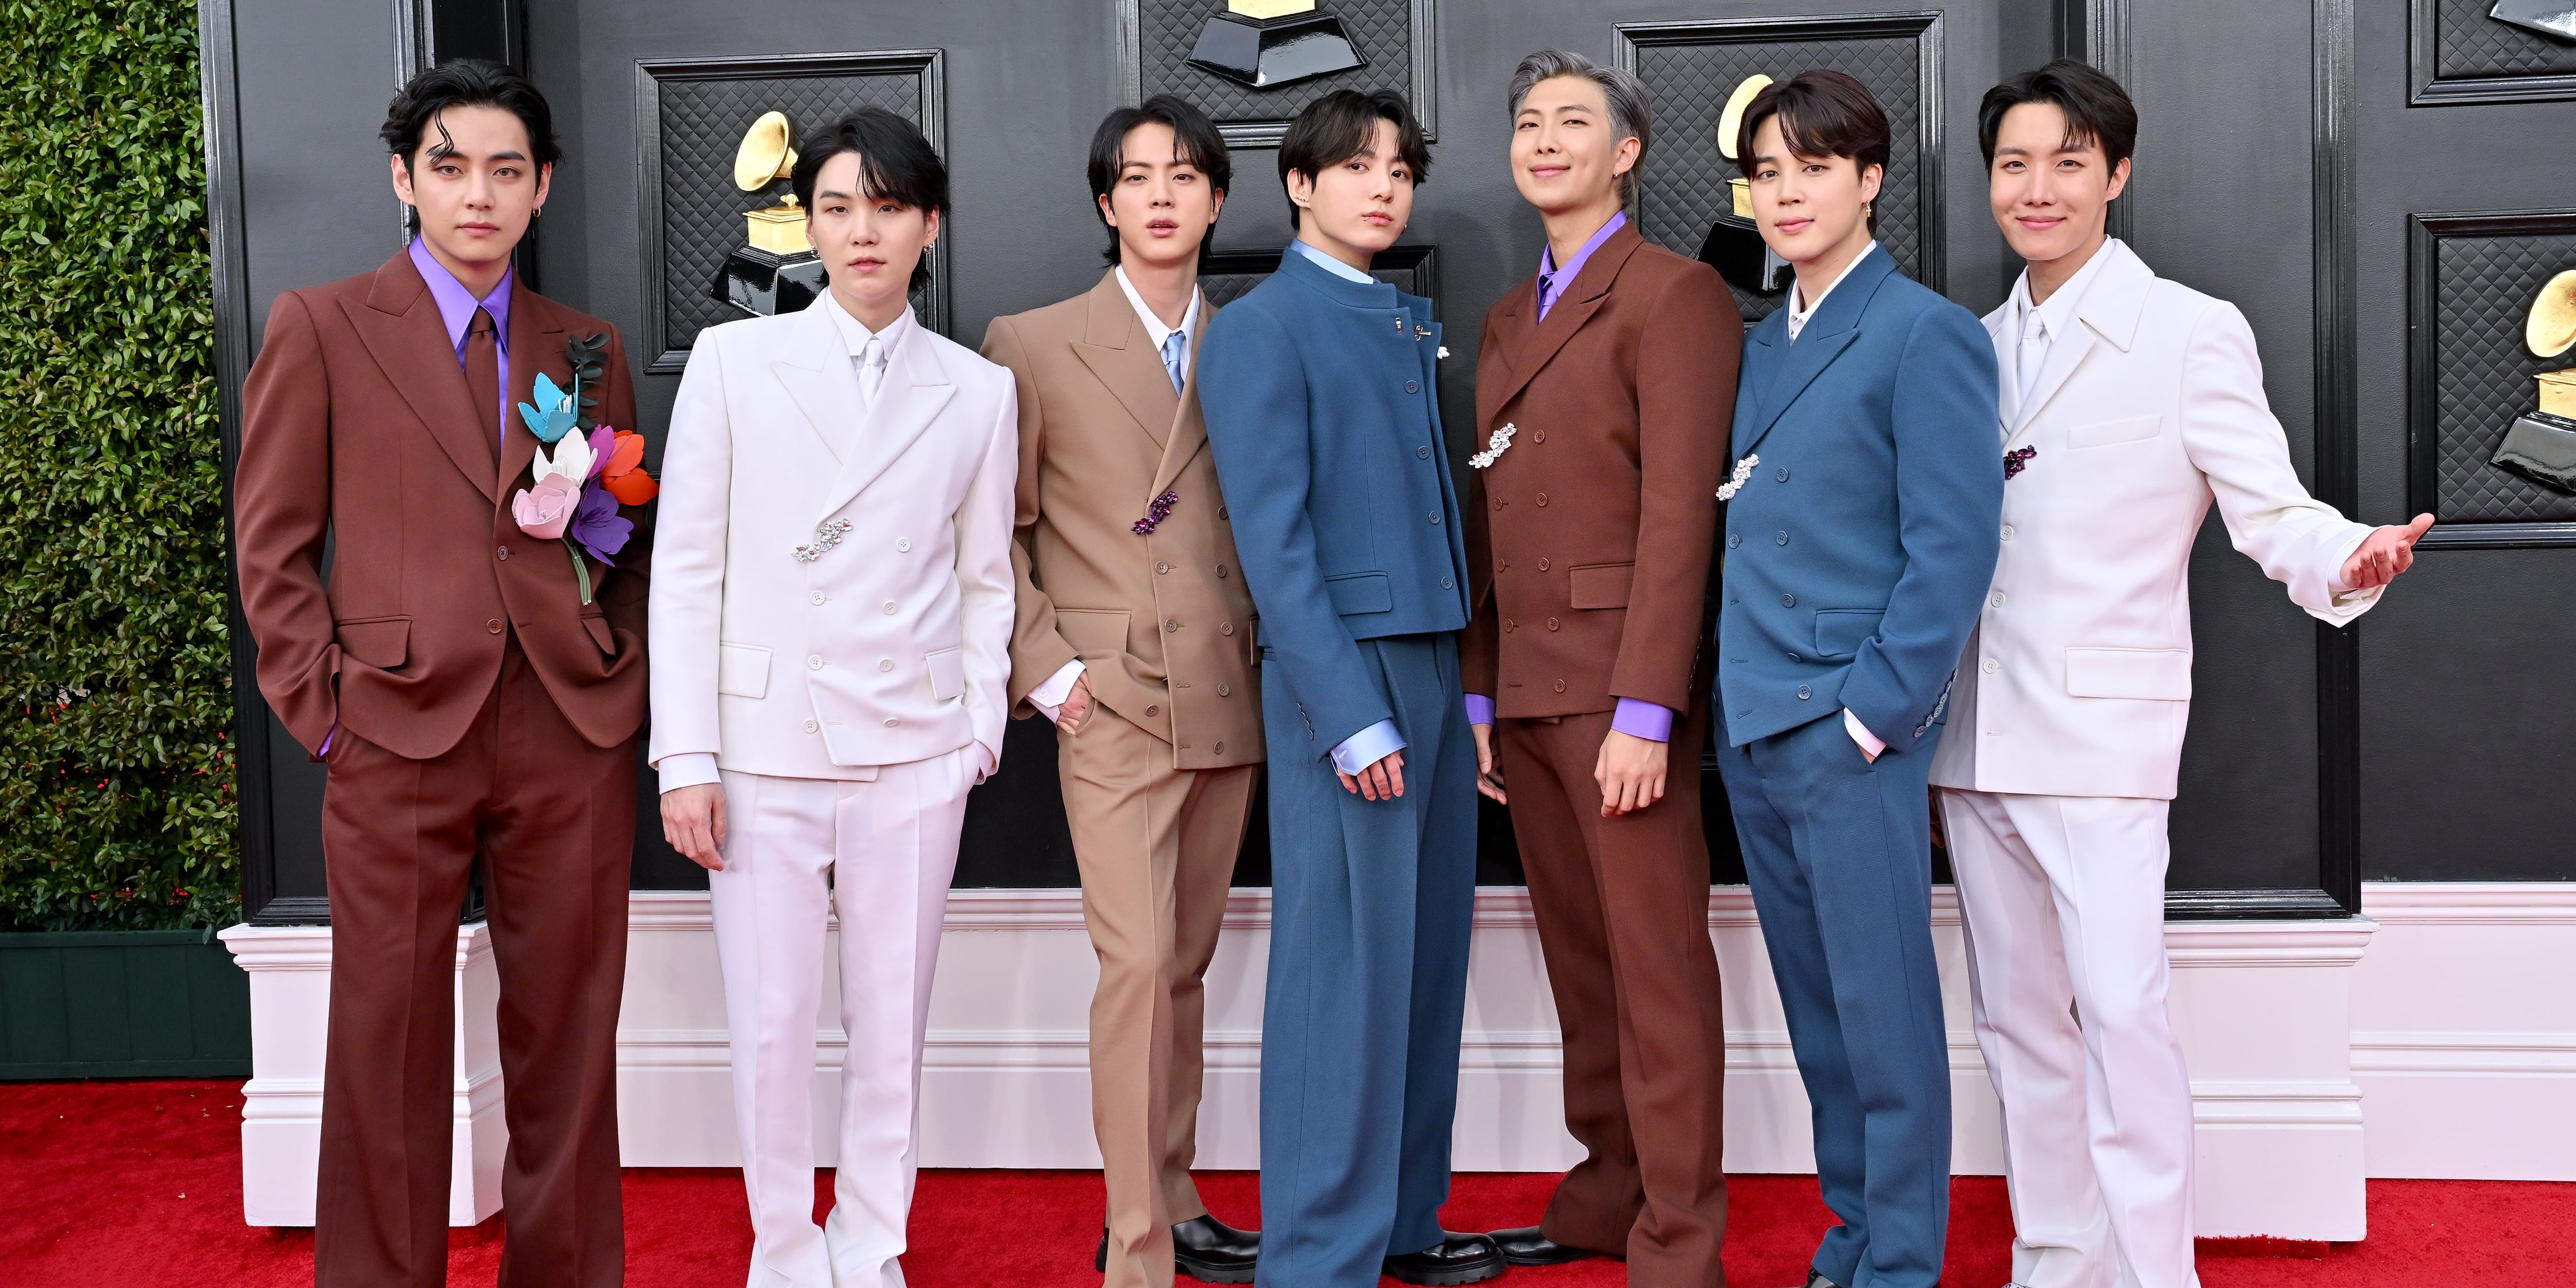 BTS Earns 2 GRAMMY Nominations After Announcing Hiatus